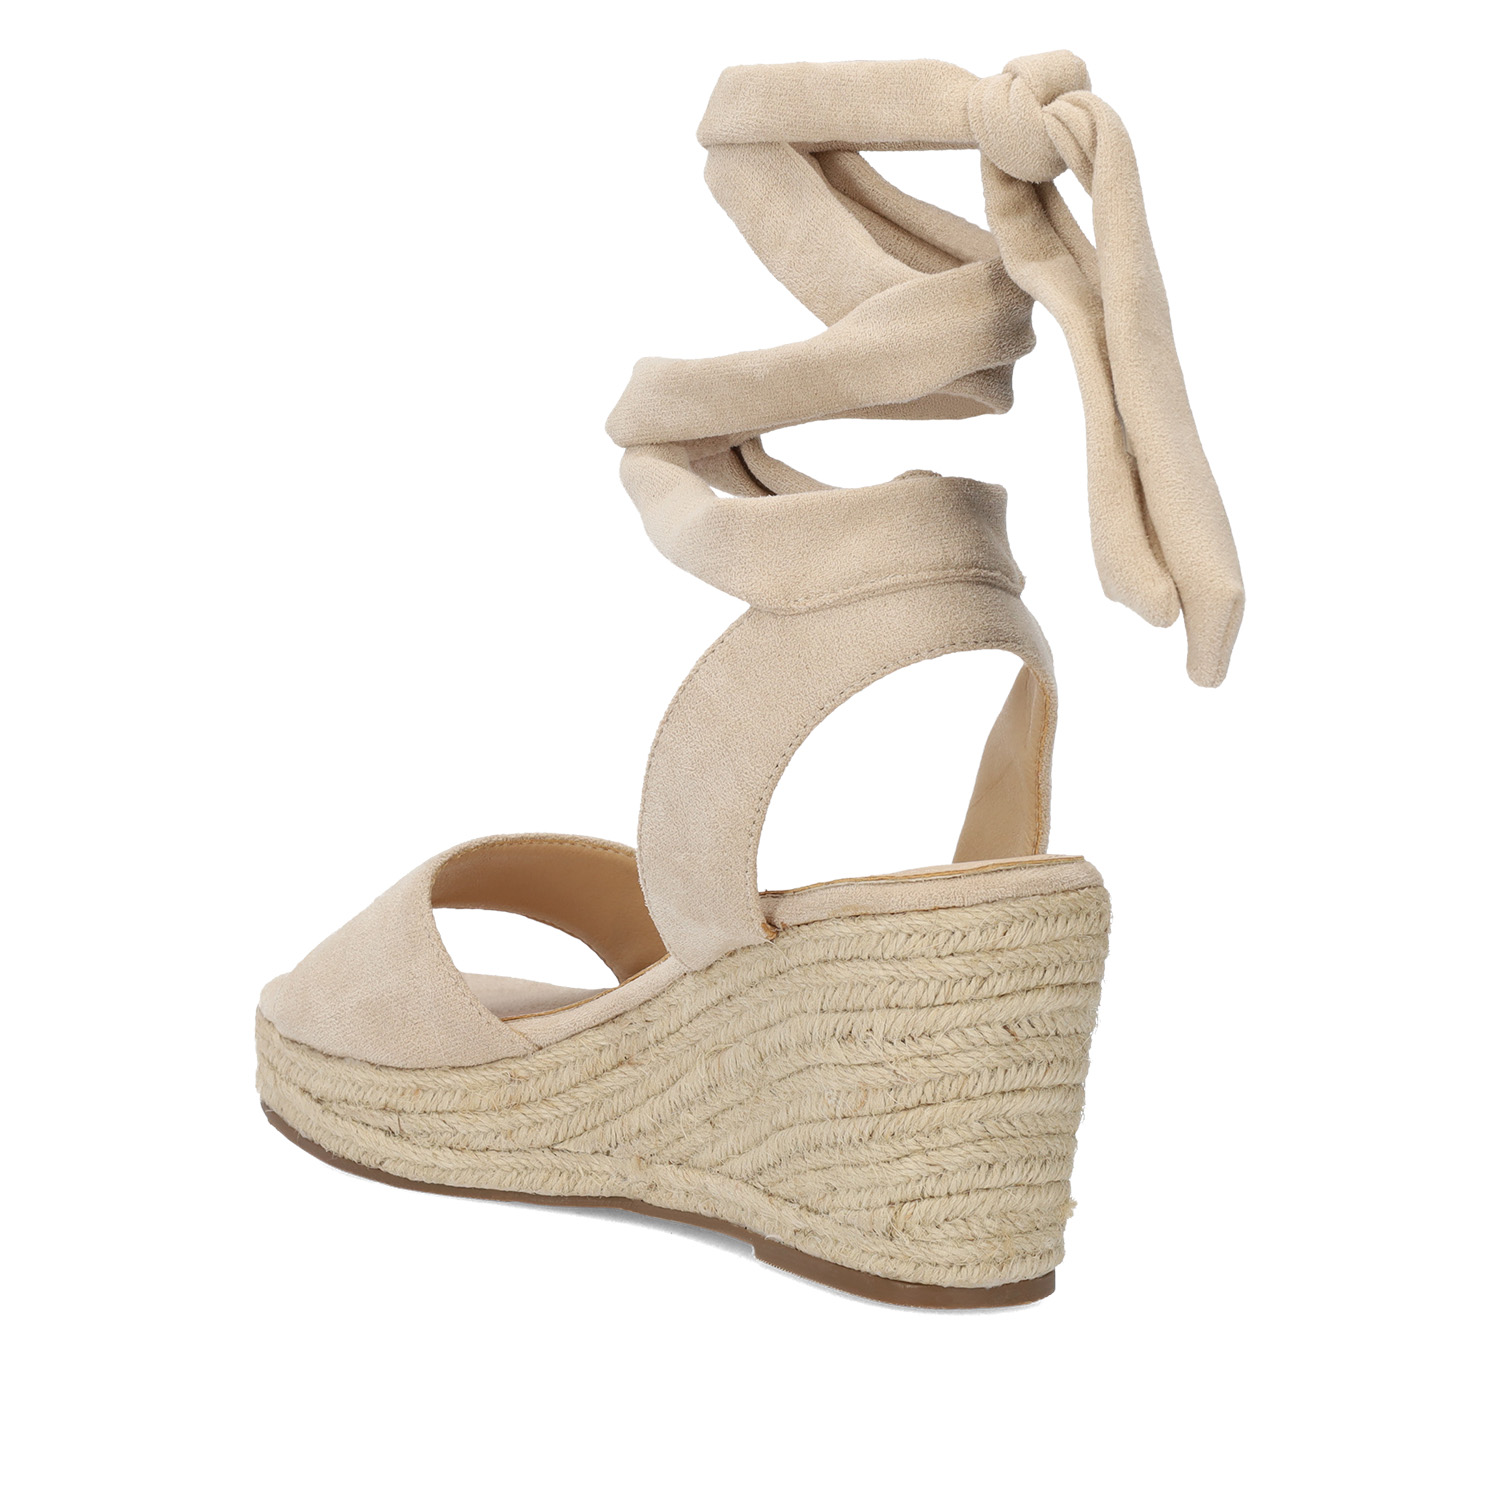 Off-white suede espadrilles with jute wedge 